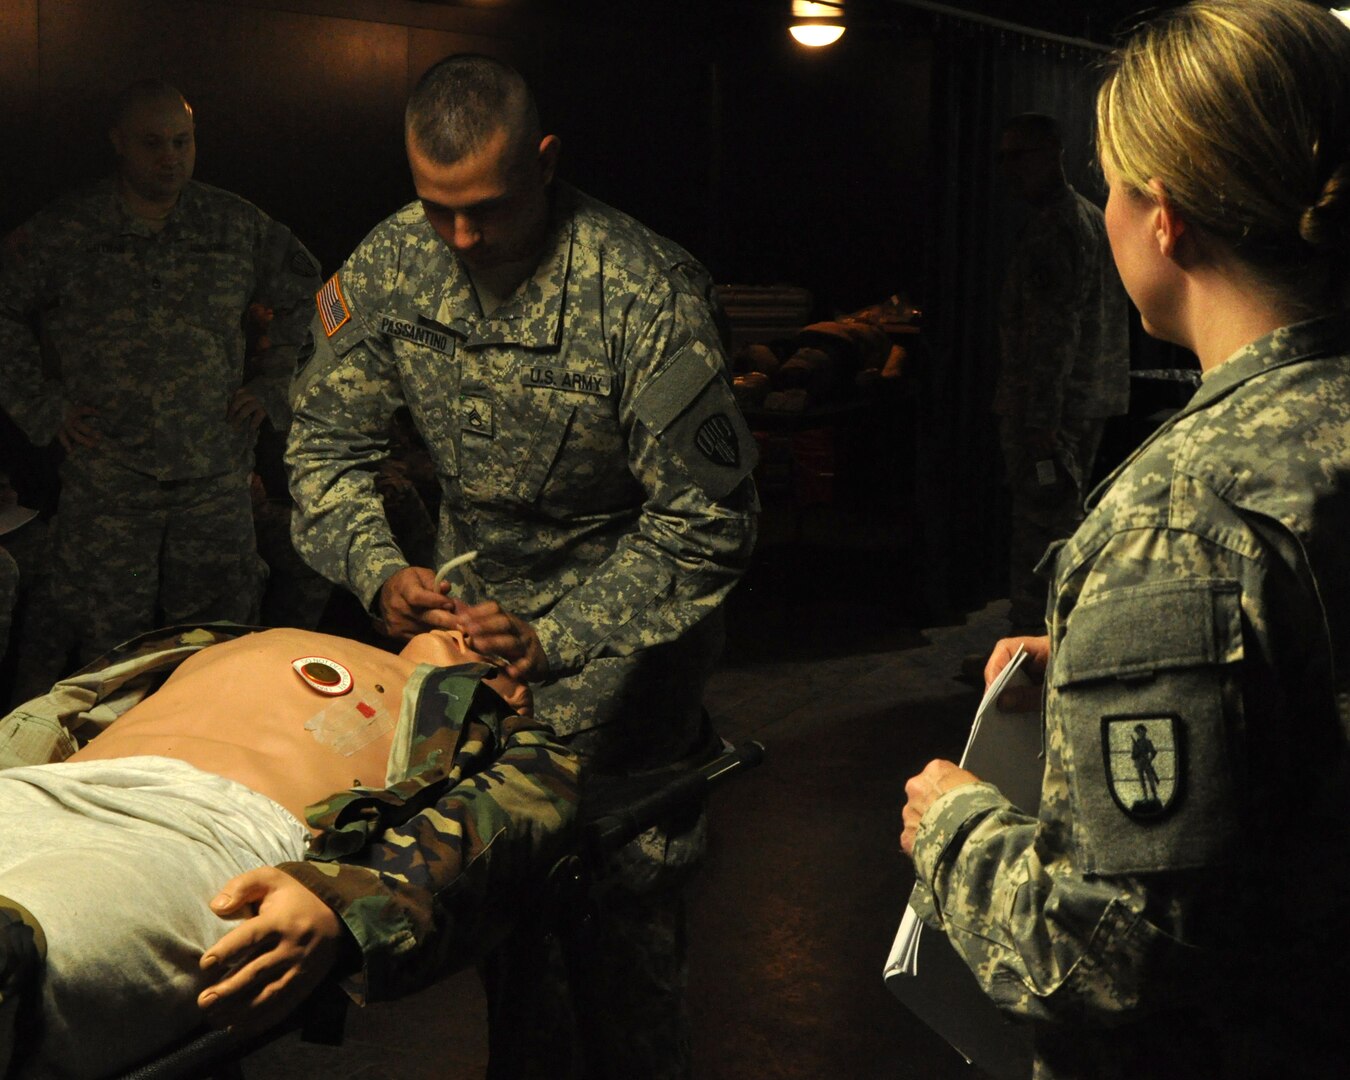 New York National Guard Staff Sgt. James Passantino, a member of the  727th MP Detachment, checks the  airway on a training mannequin during Combat Lifesaver Training conducted by the 106th Regional Training Institute here on Saturday, June 21, as Staff Sgt. Dara Cunningham, an instructor, watches.